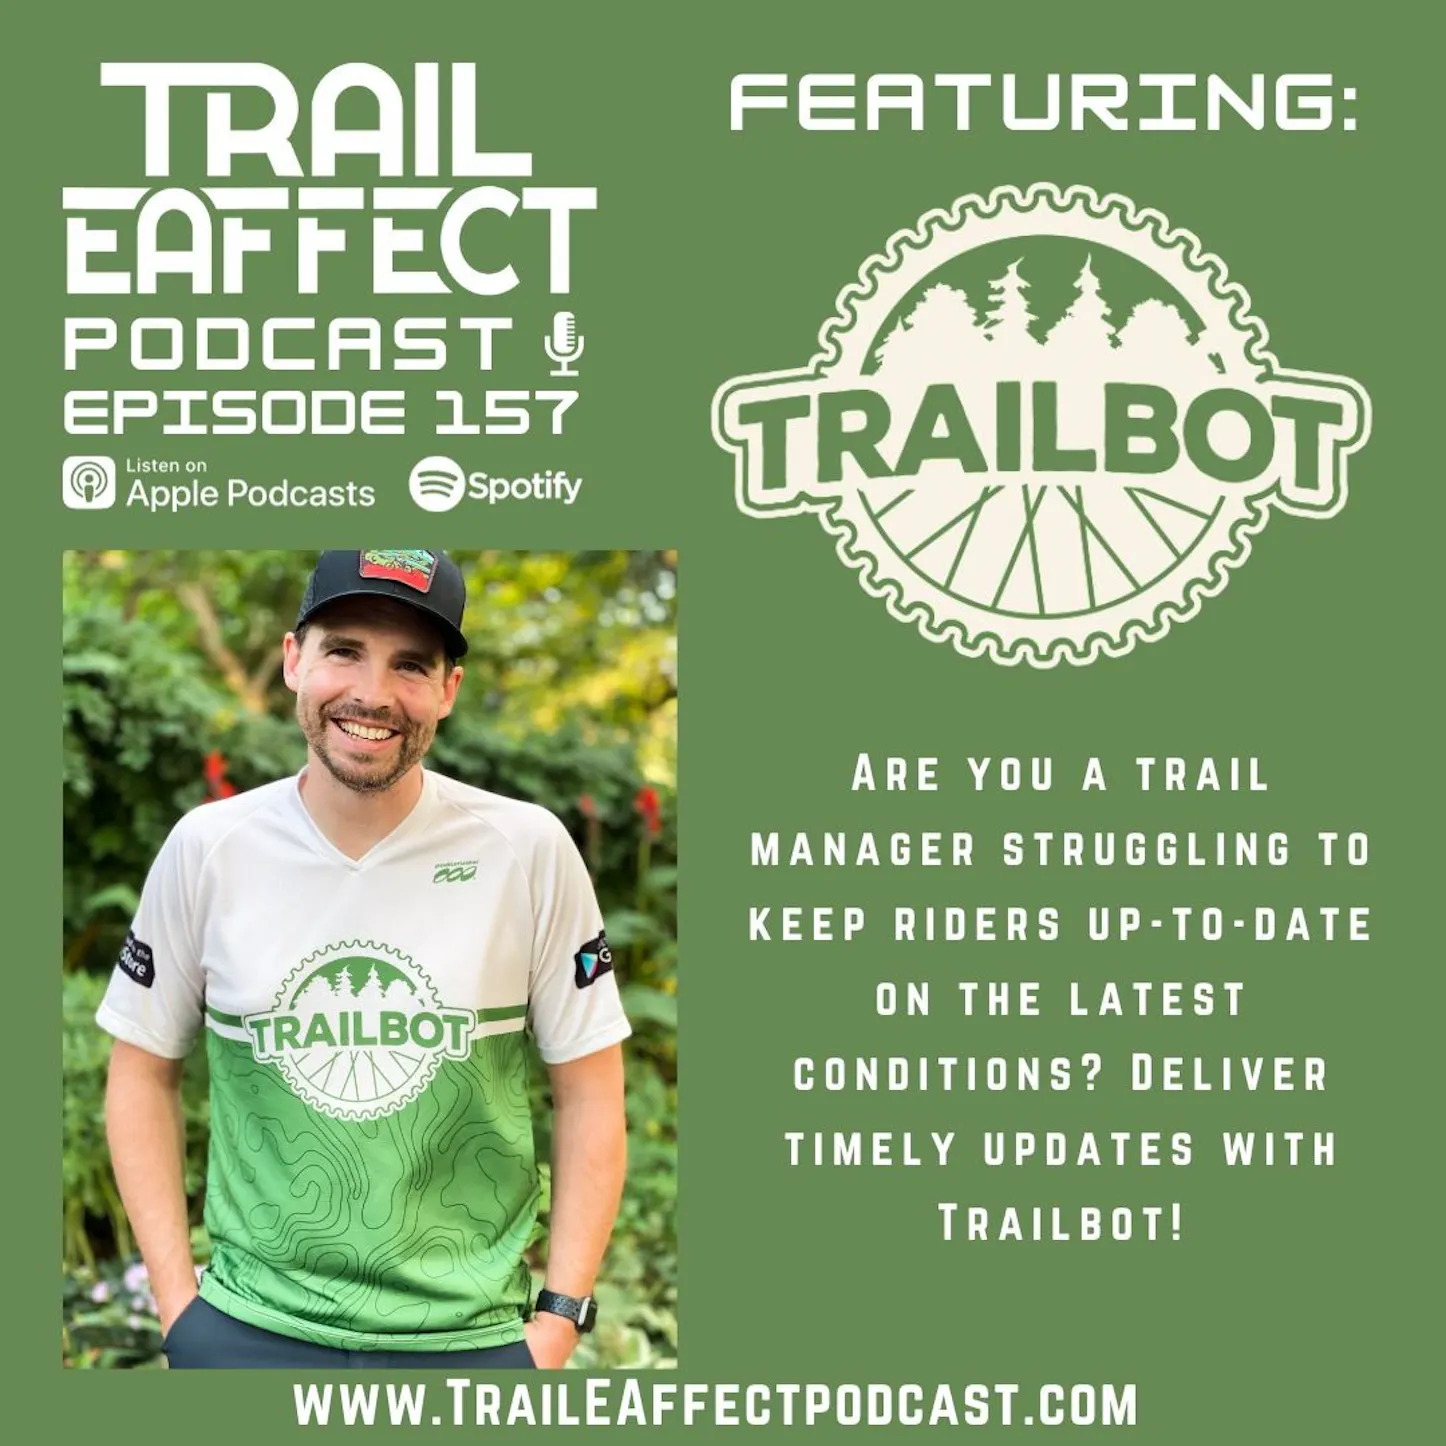 Trailbot on Trail EAffect